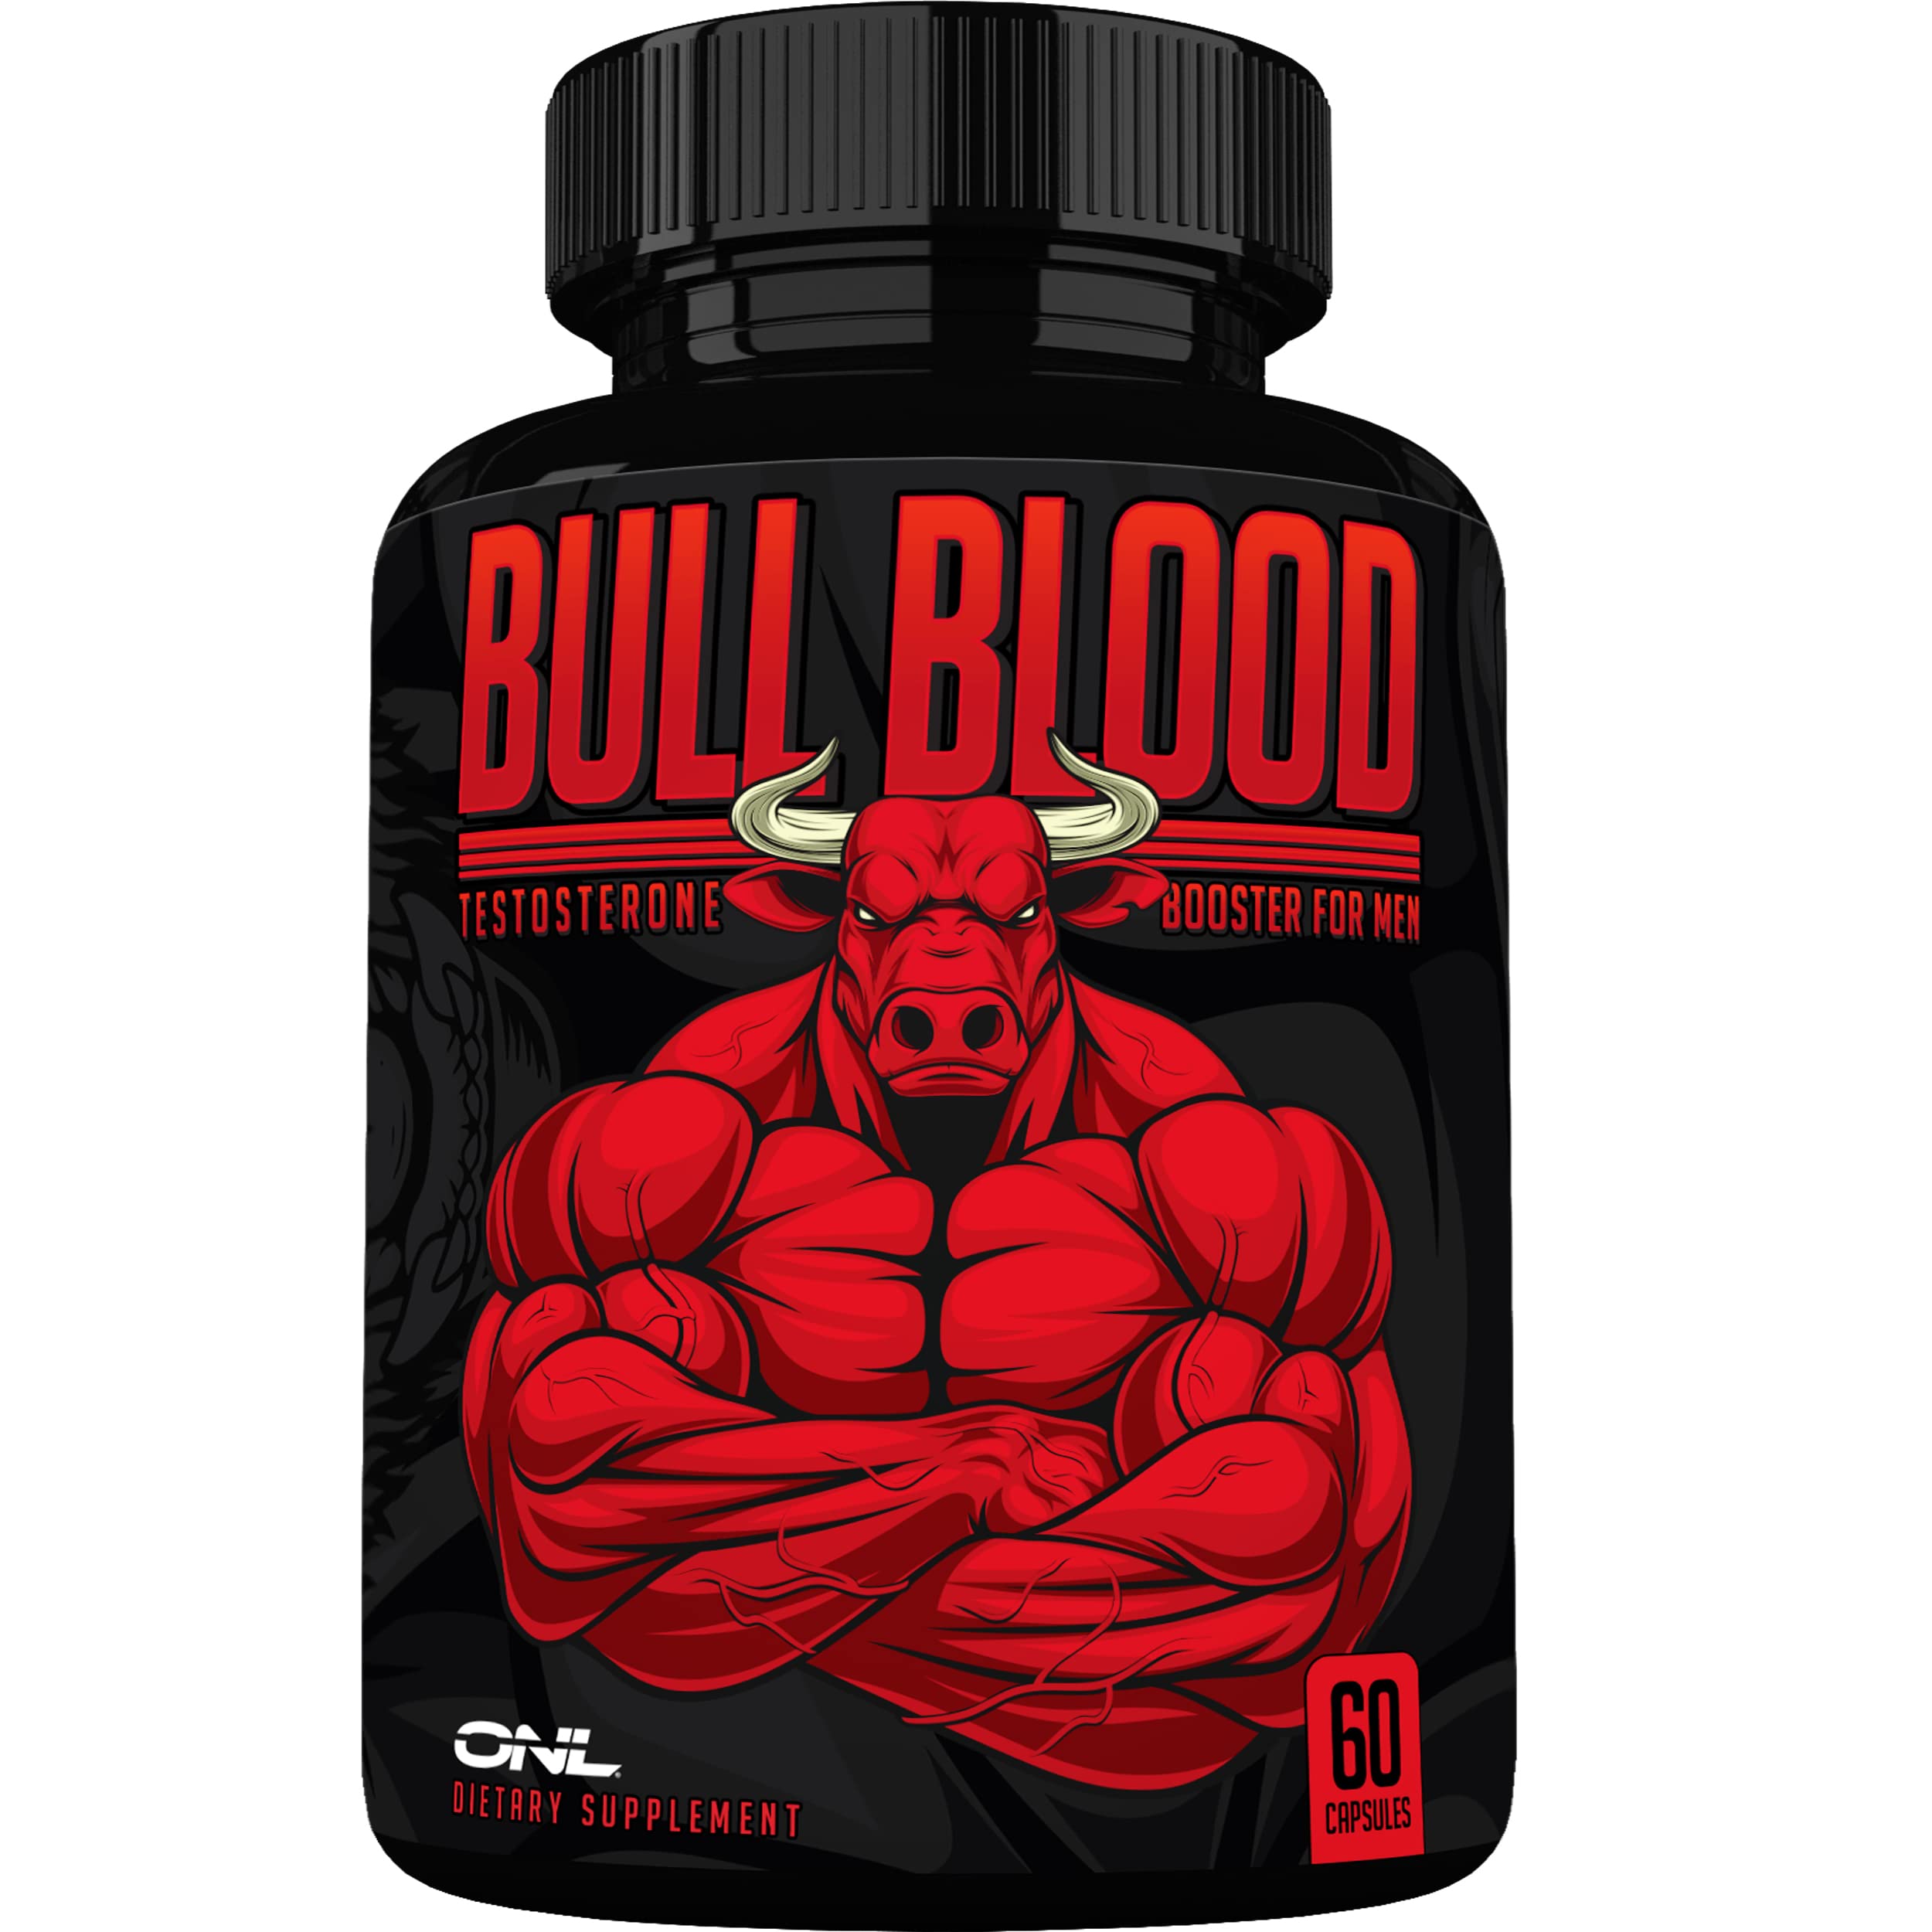 Bull Blood Testosterone Booster for Men - Male Enhancing Test Booster Pills for Stamina & Endurance w/ Maca Root, Horny Goat Weed & Tribulus Terrestris Extract, Tongkat ali Supplement for Men - 60Ct